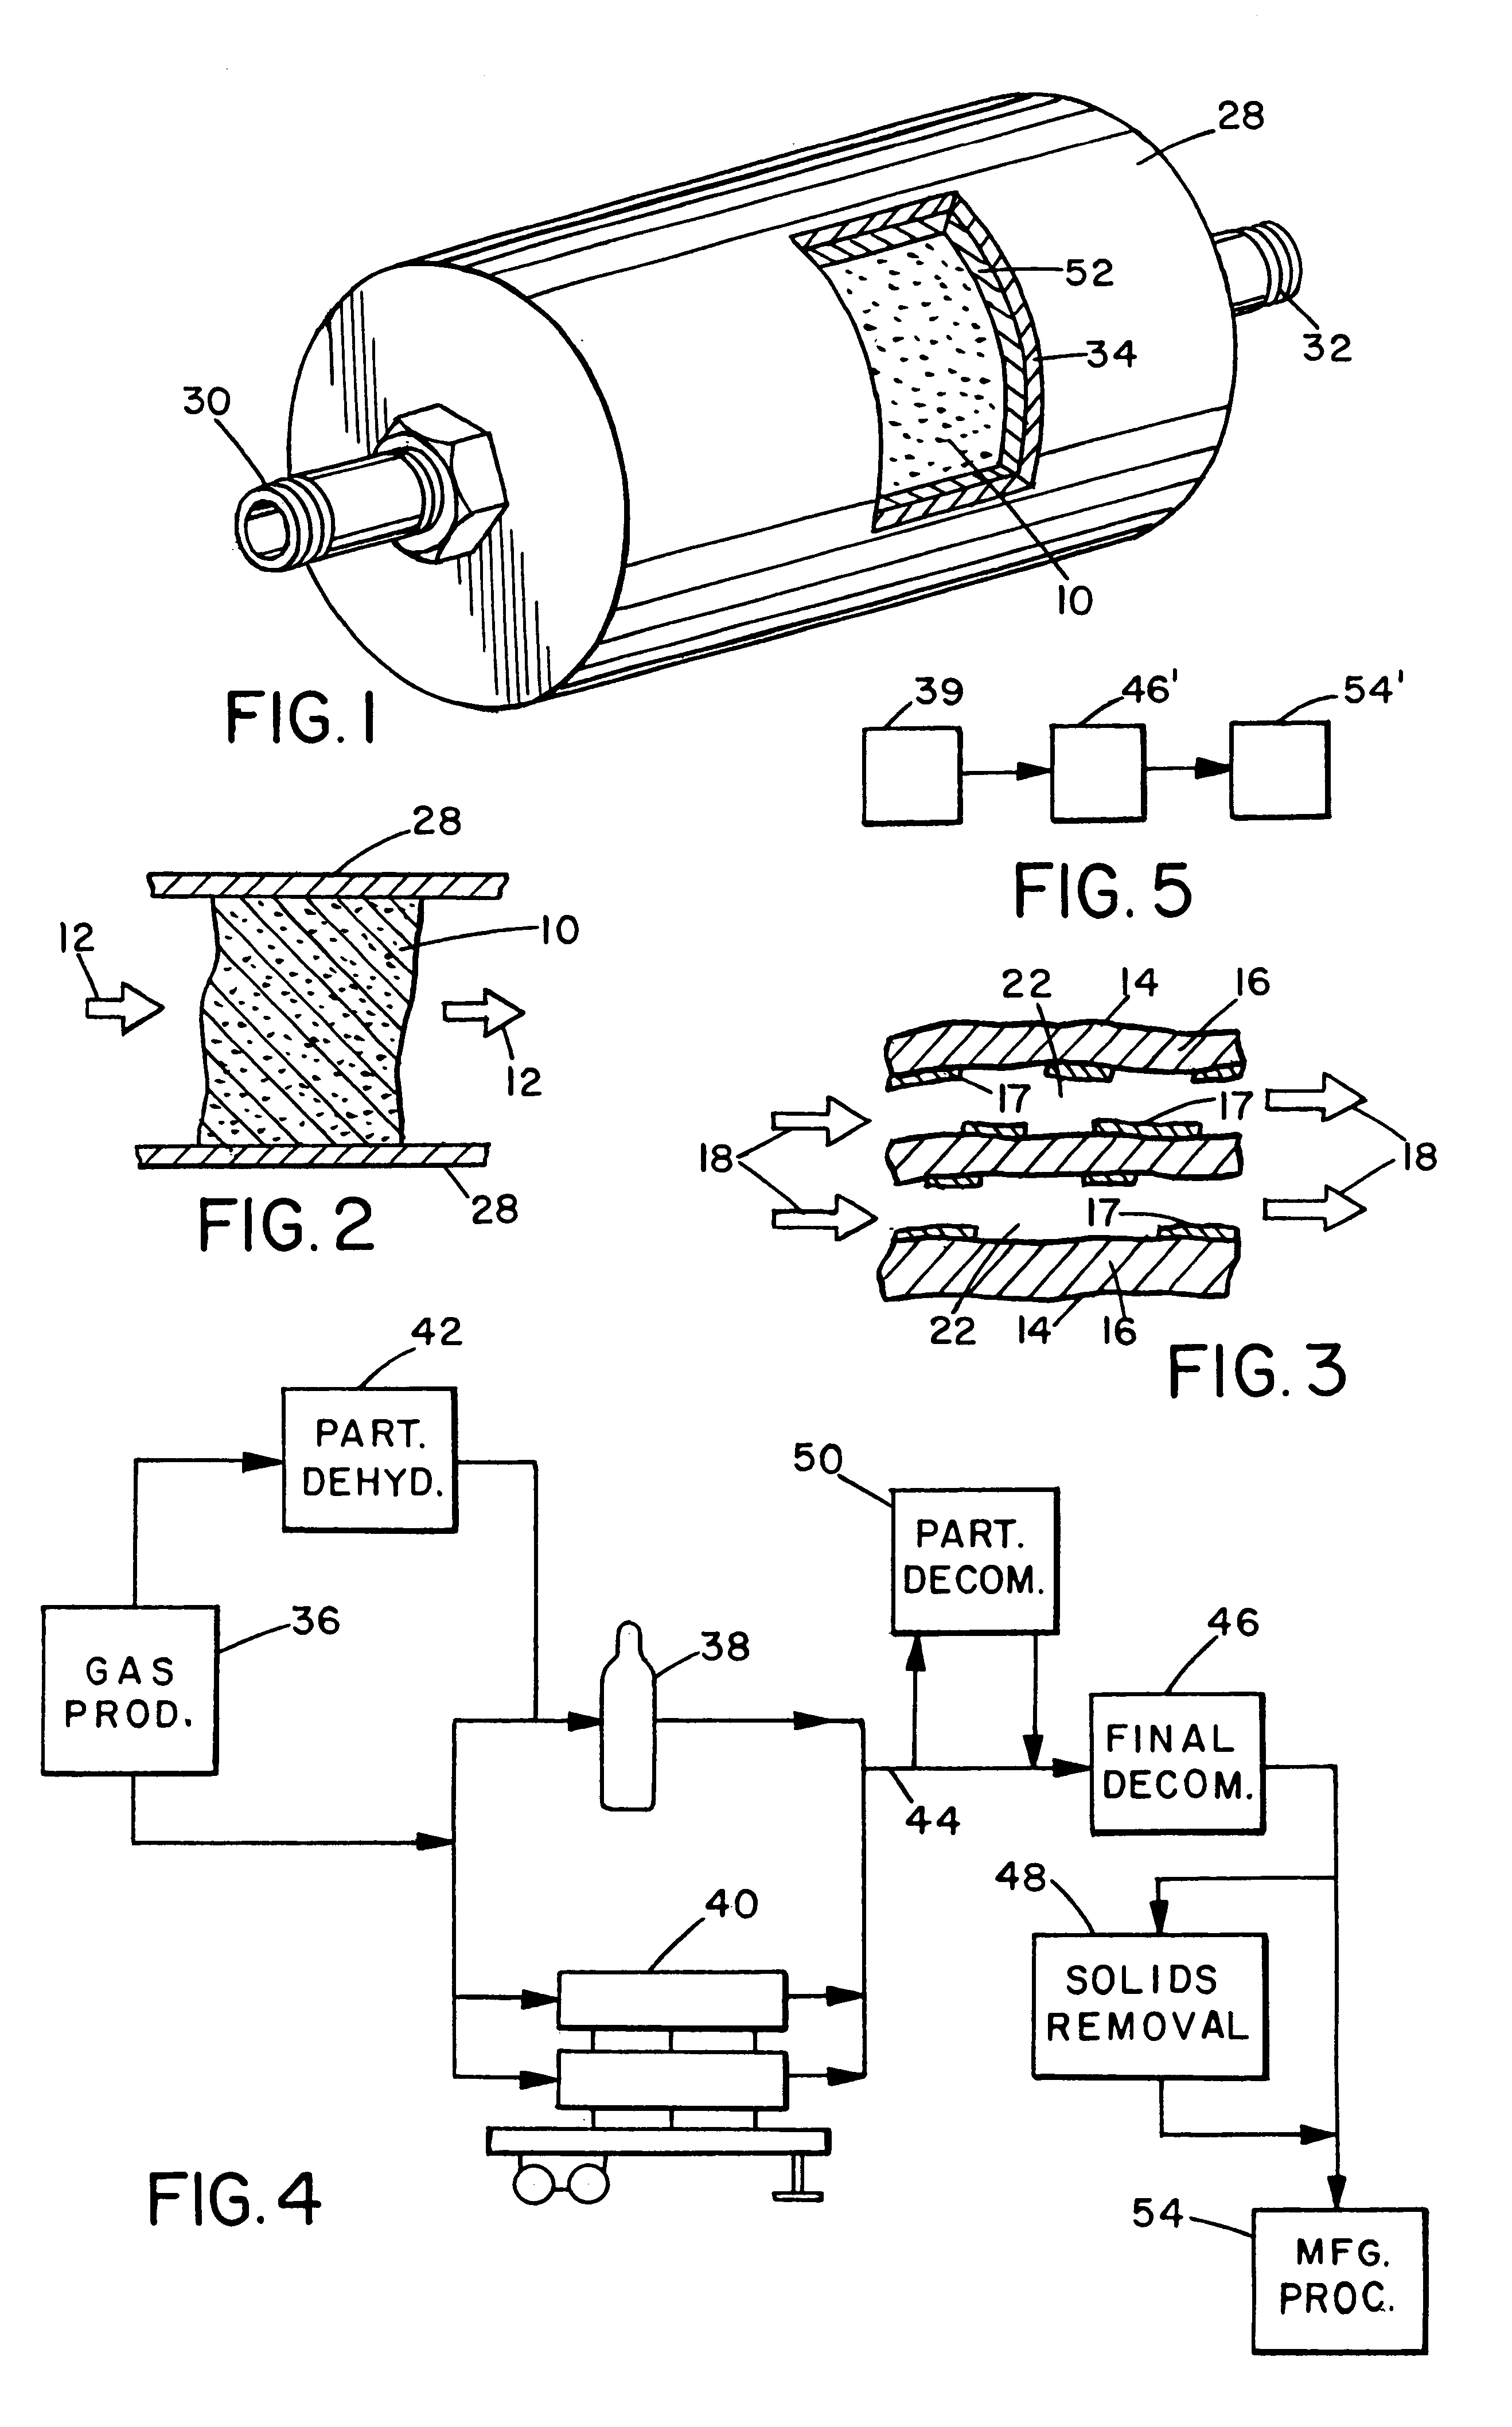 Method and apparatus for purification of hydride gas streams